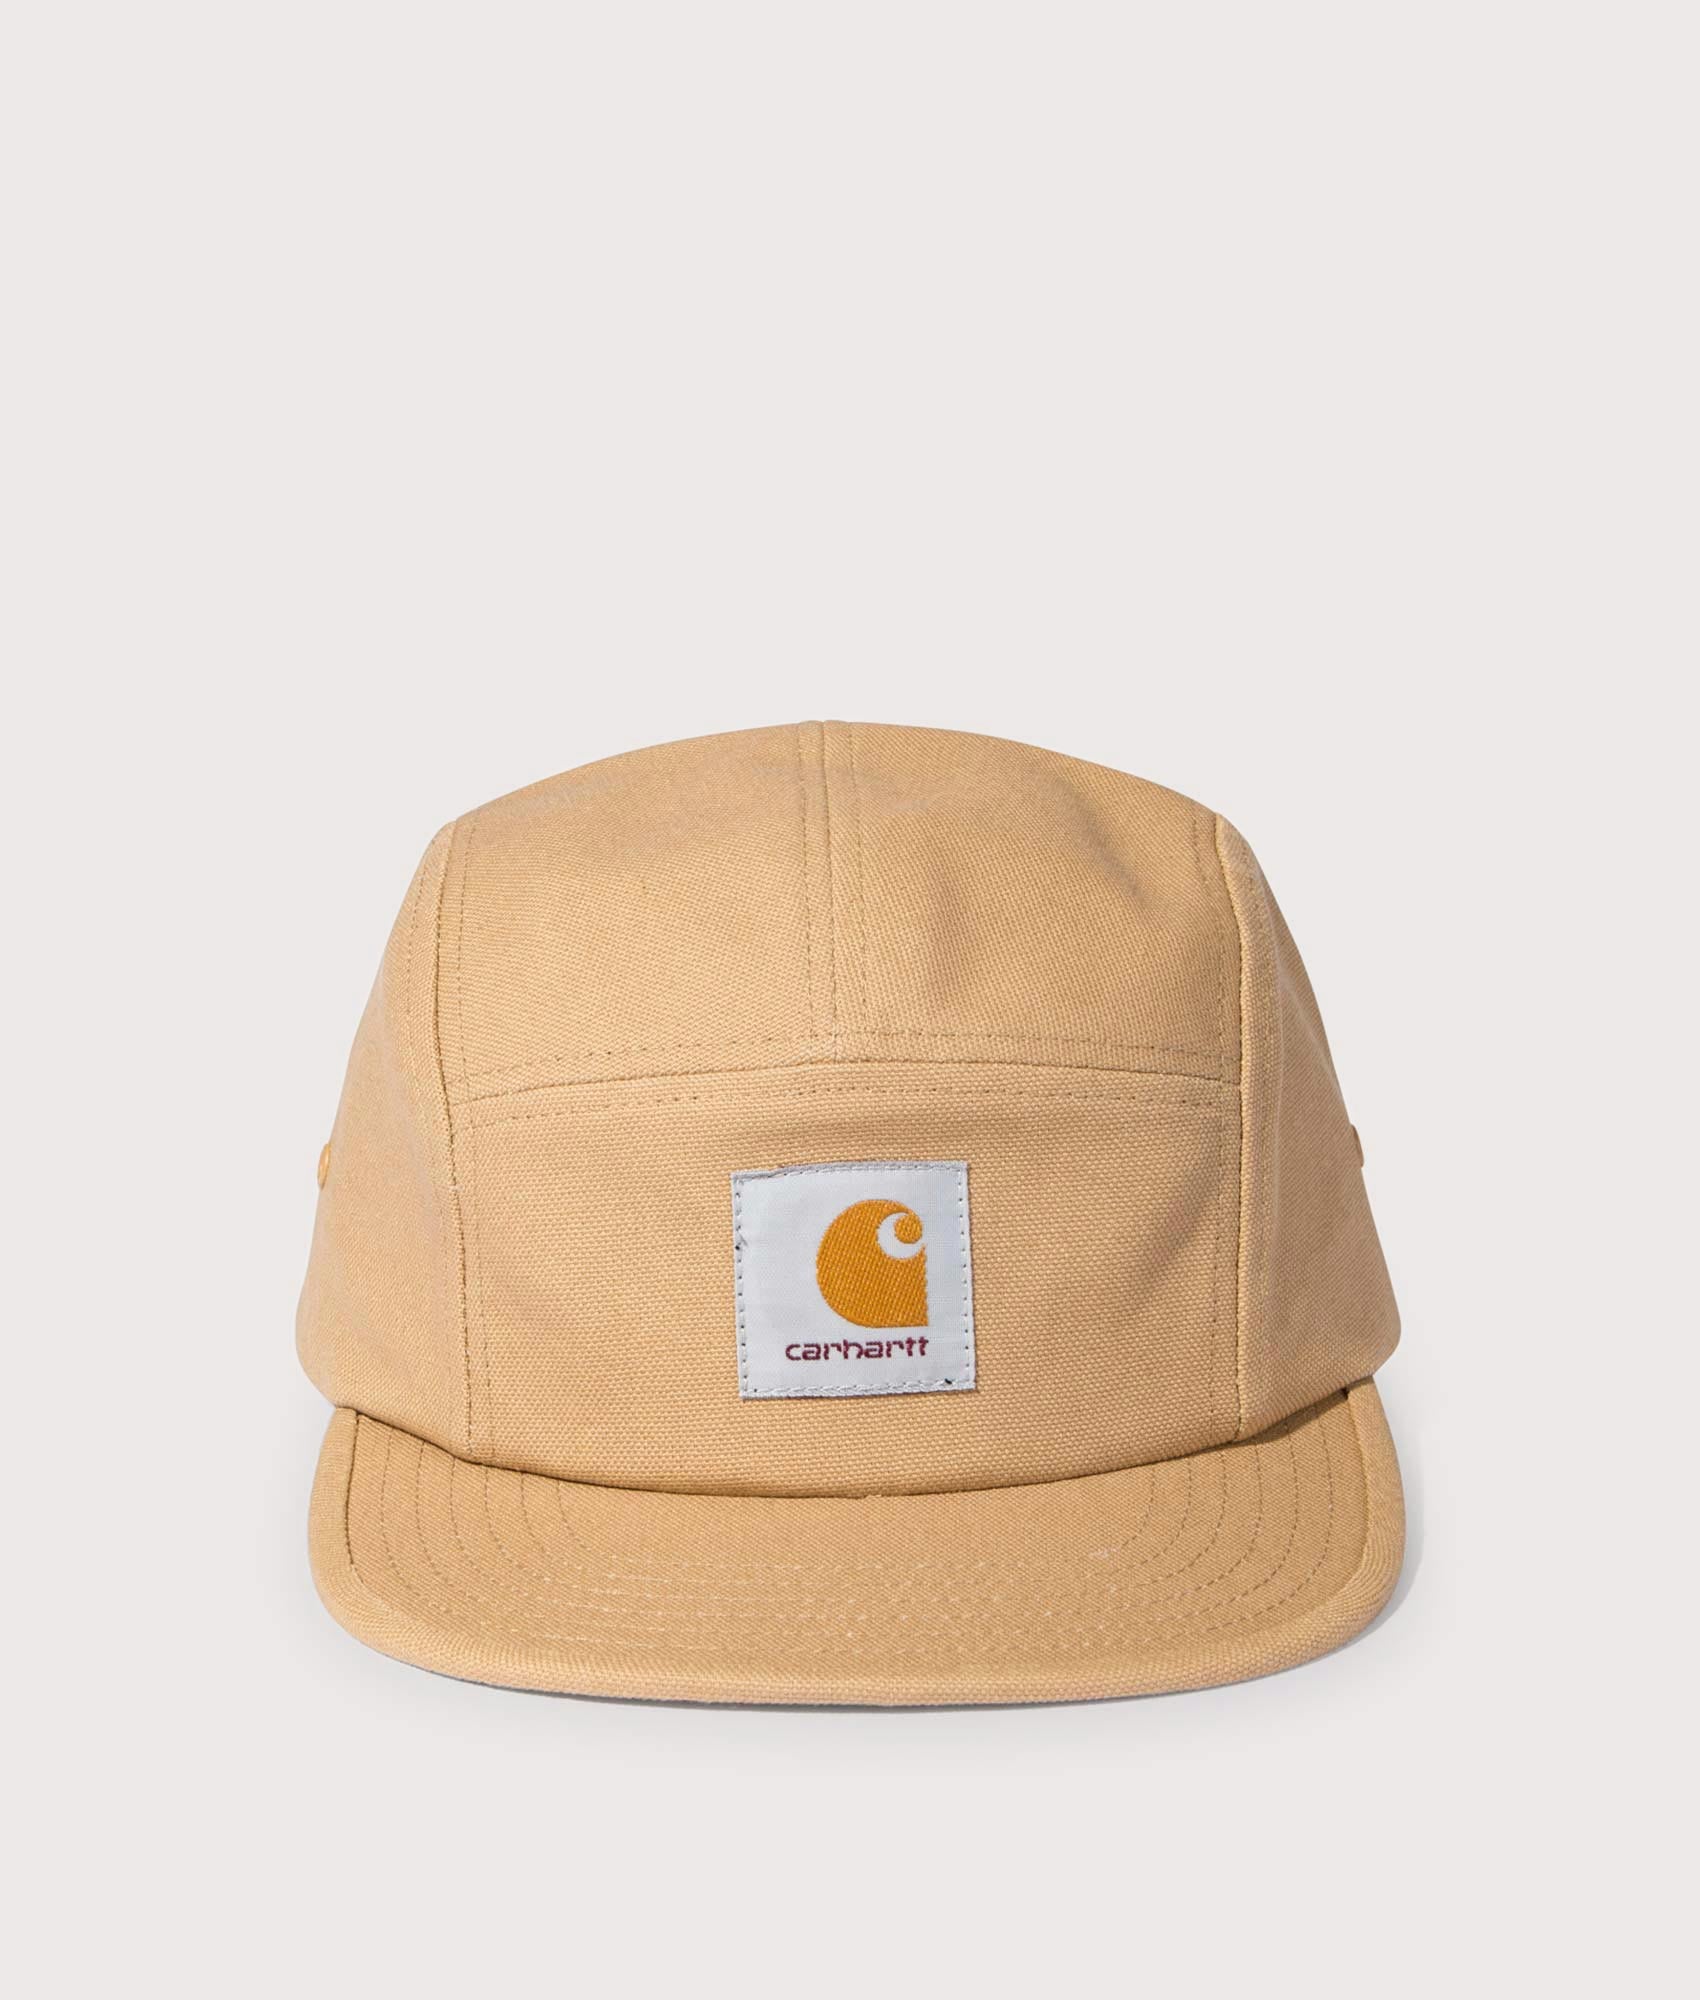 Carhartt WIP Mens Backley Cap - Colour: 07EXX Dusty H Brown - Size: One Size